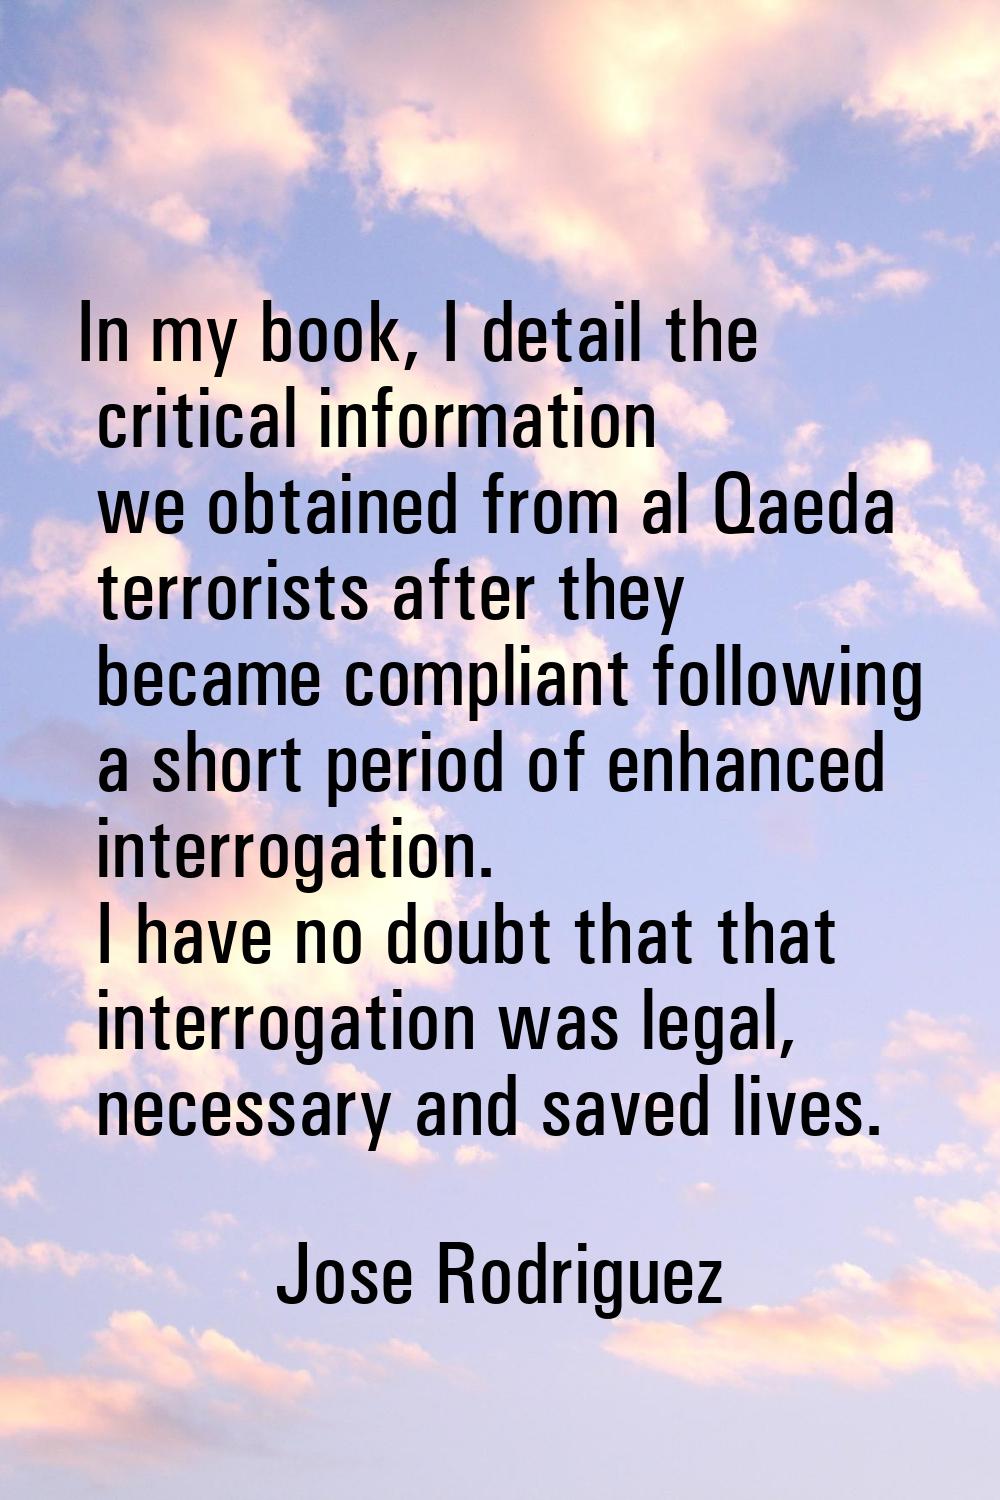 In my book, I detail the critical information we obtained from al Qaeda terrorists after they becam